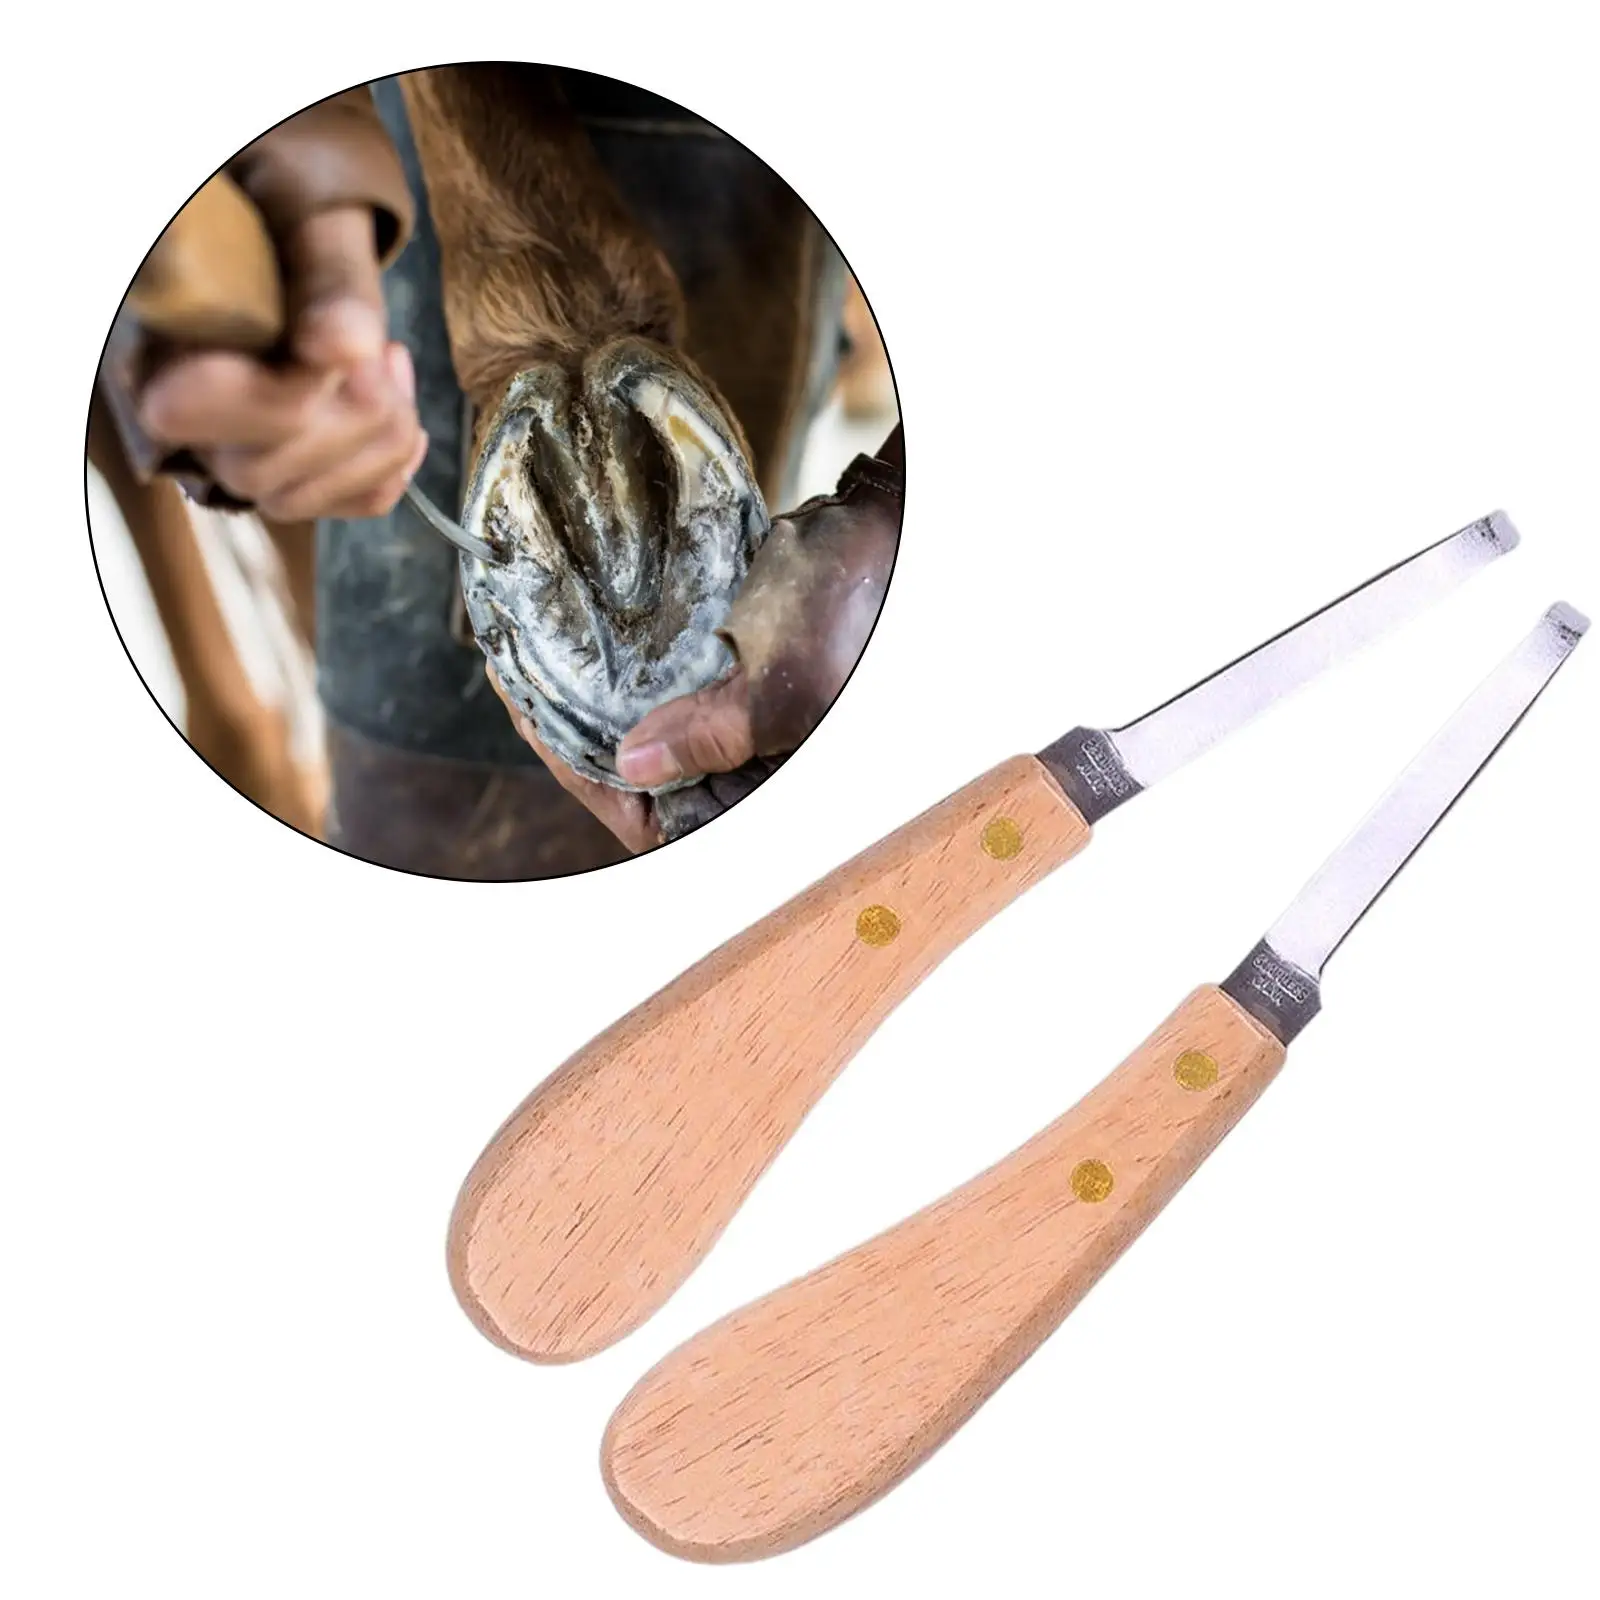 Cattle Hoof Cutter Nail Clippers Multipurpose Comfortable Grip Hoof Nippers Supplies Trimming for Goats farm Animal Pig